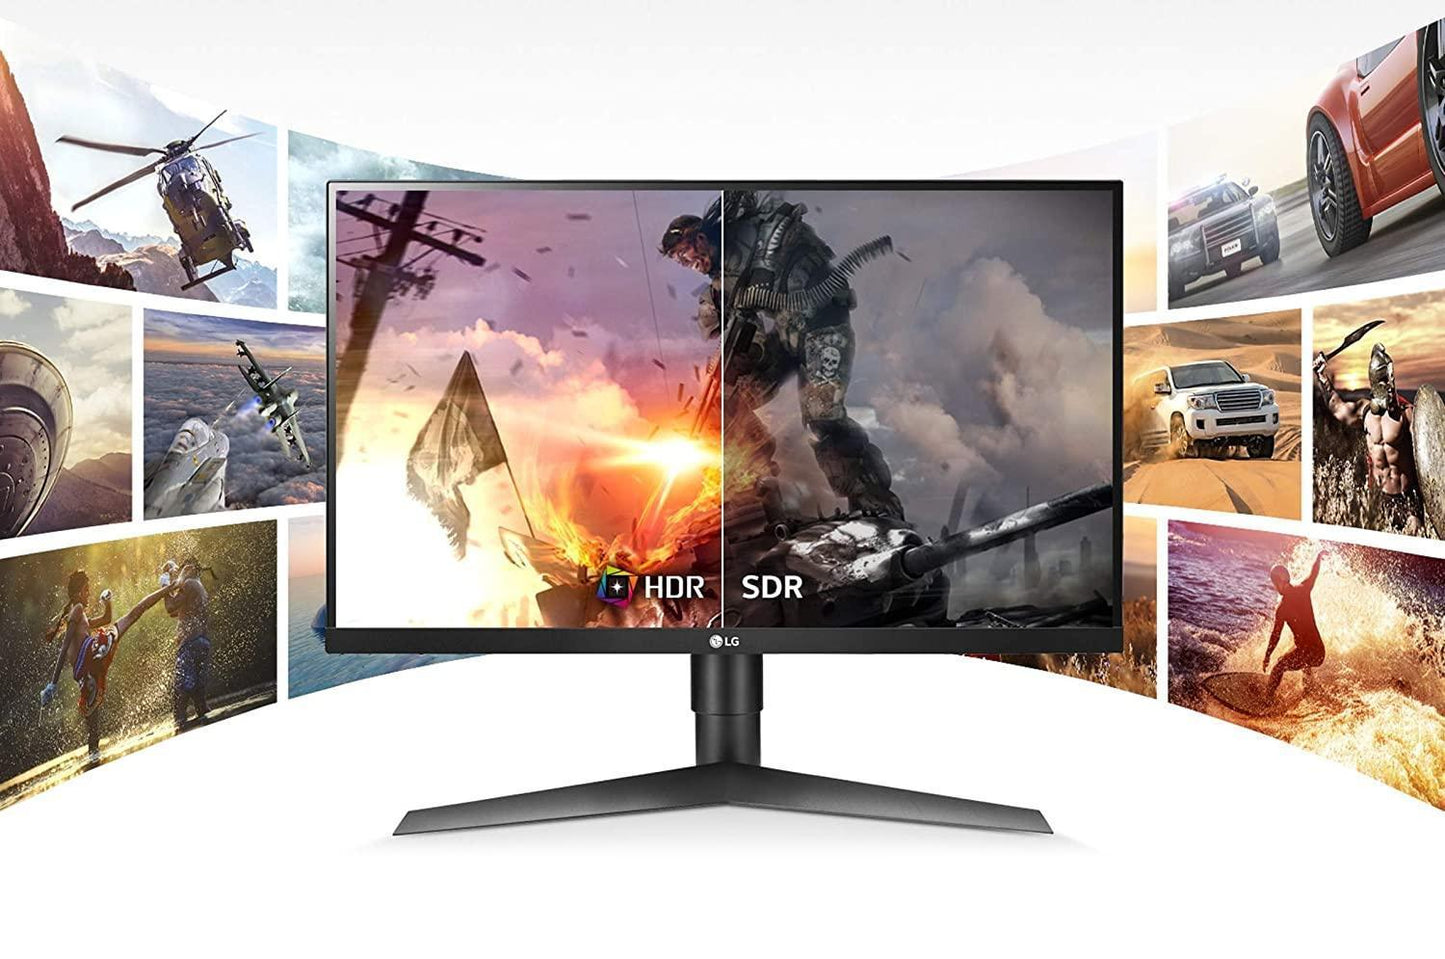 LG Ultragear 34GL750F 34" 21:9 Curved 144 Hz FreeSync IPS Gaming Monitor - Store For Gamers